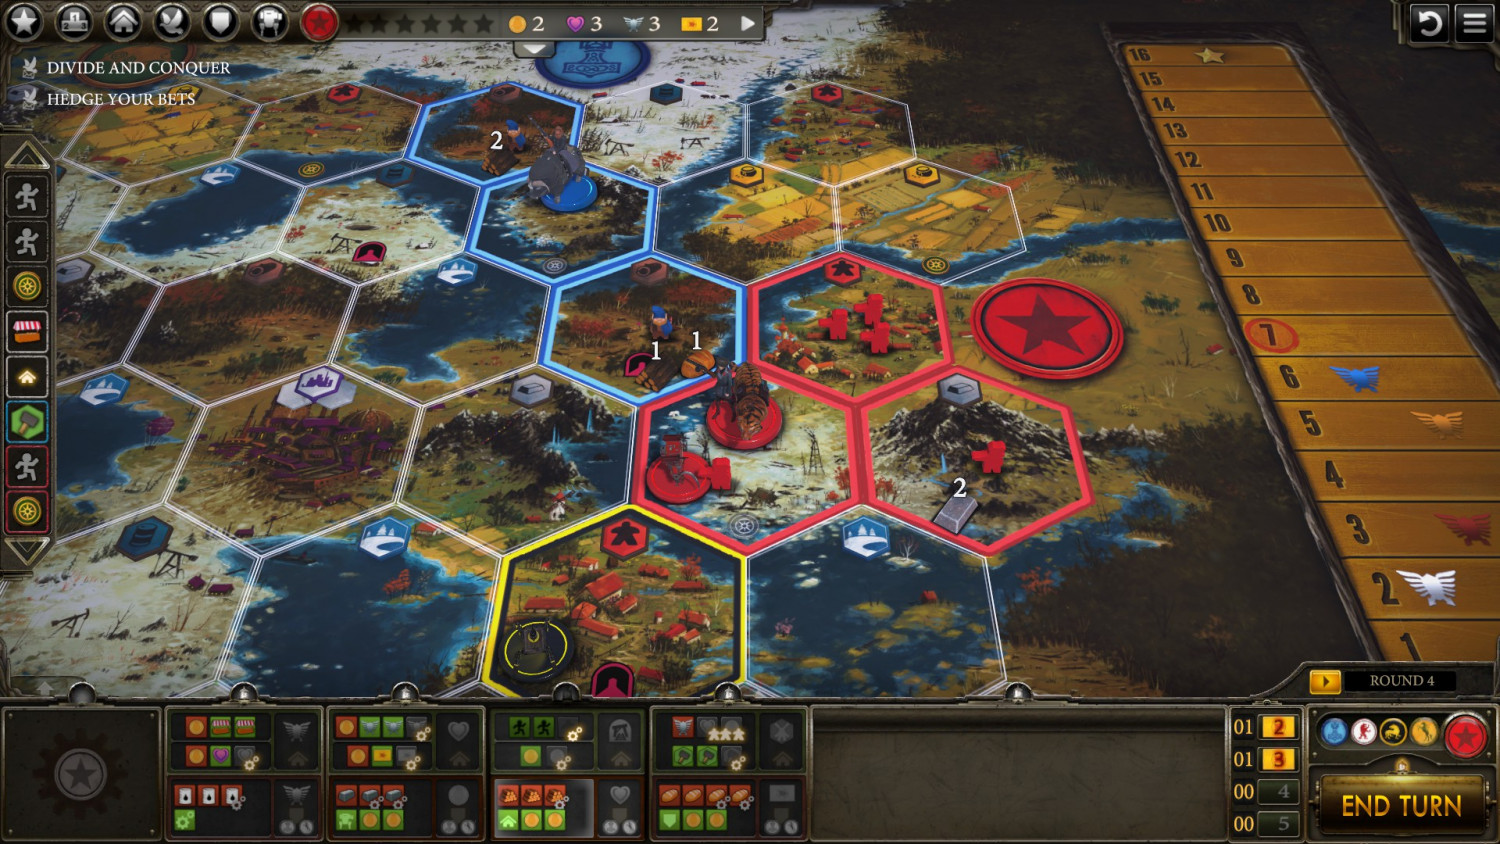 Top 10 Board Games You Can Play Digitally With Your Friends On